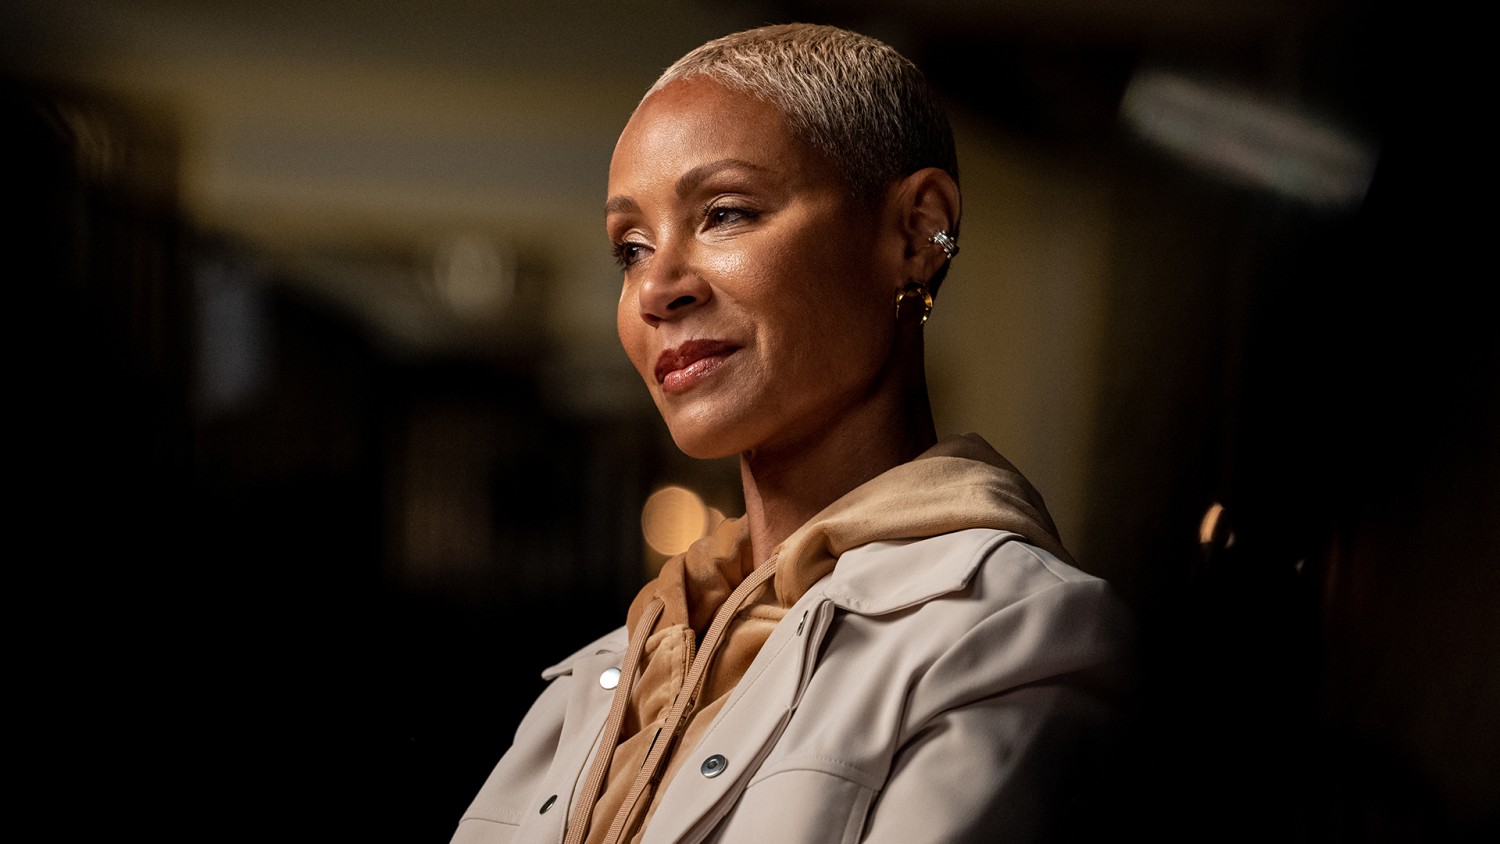 Jada Pinkett Smith and the controversy surrounding her life